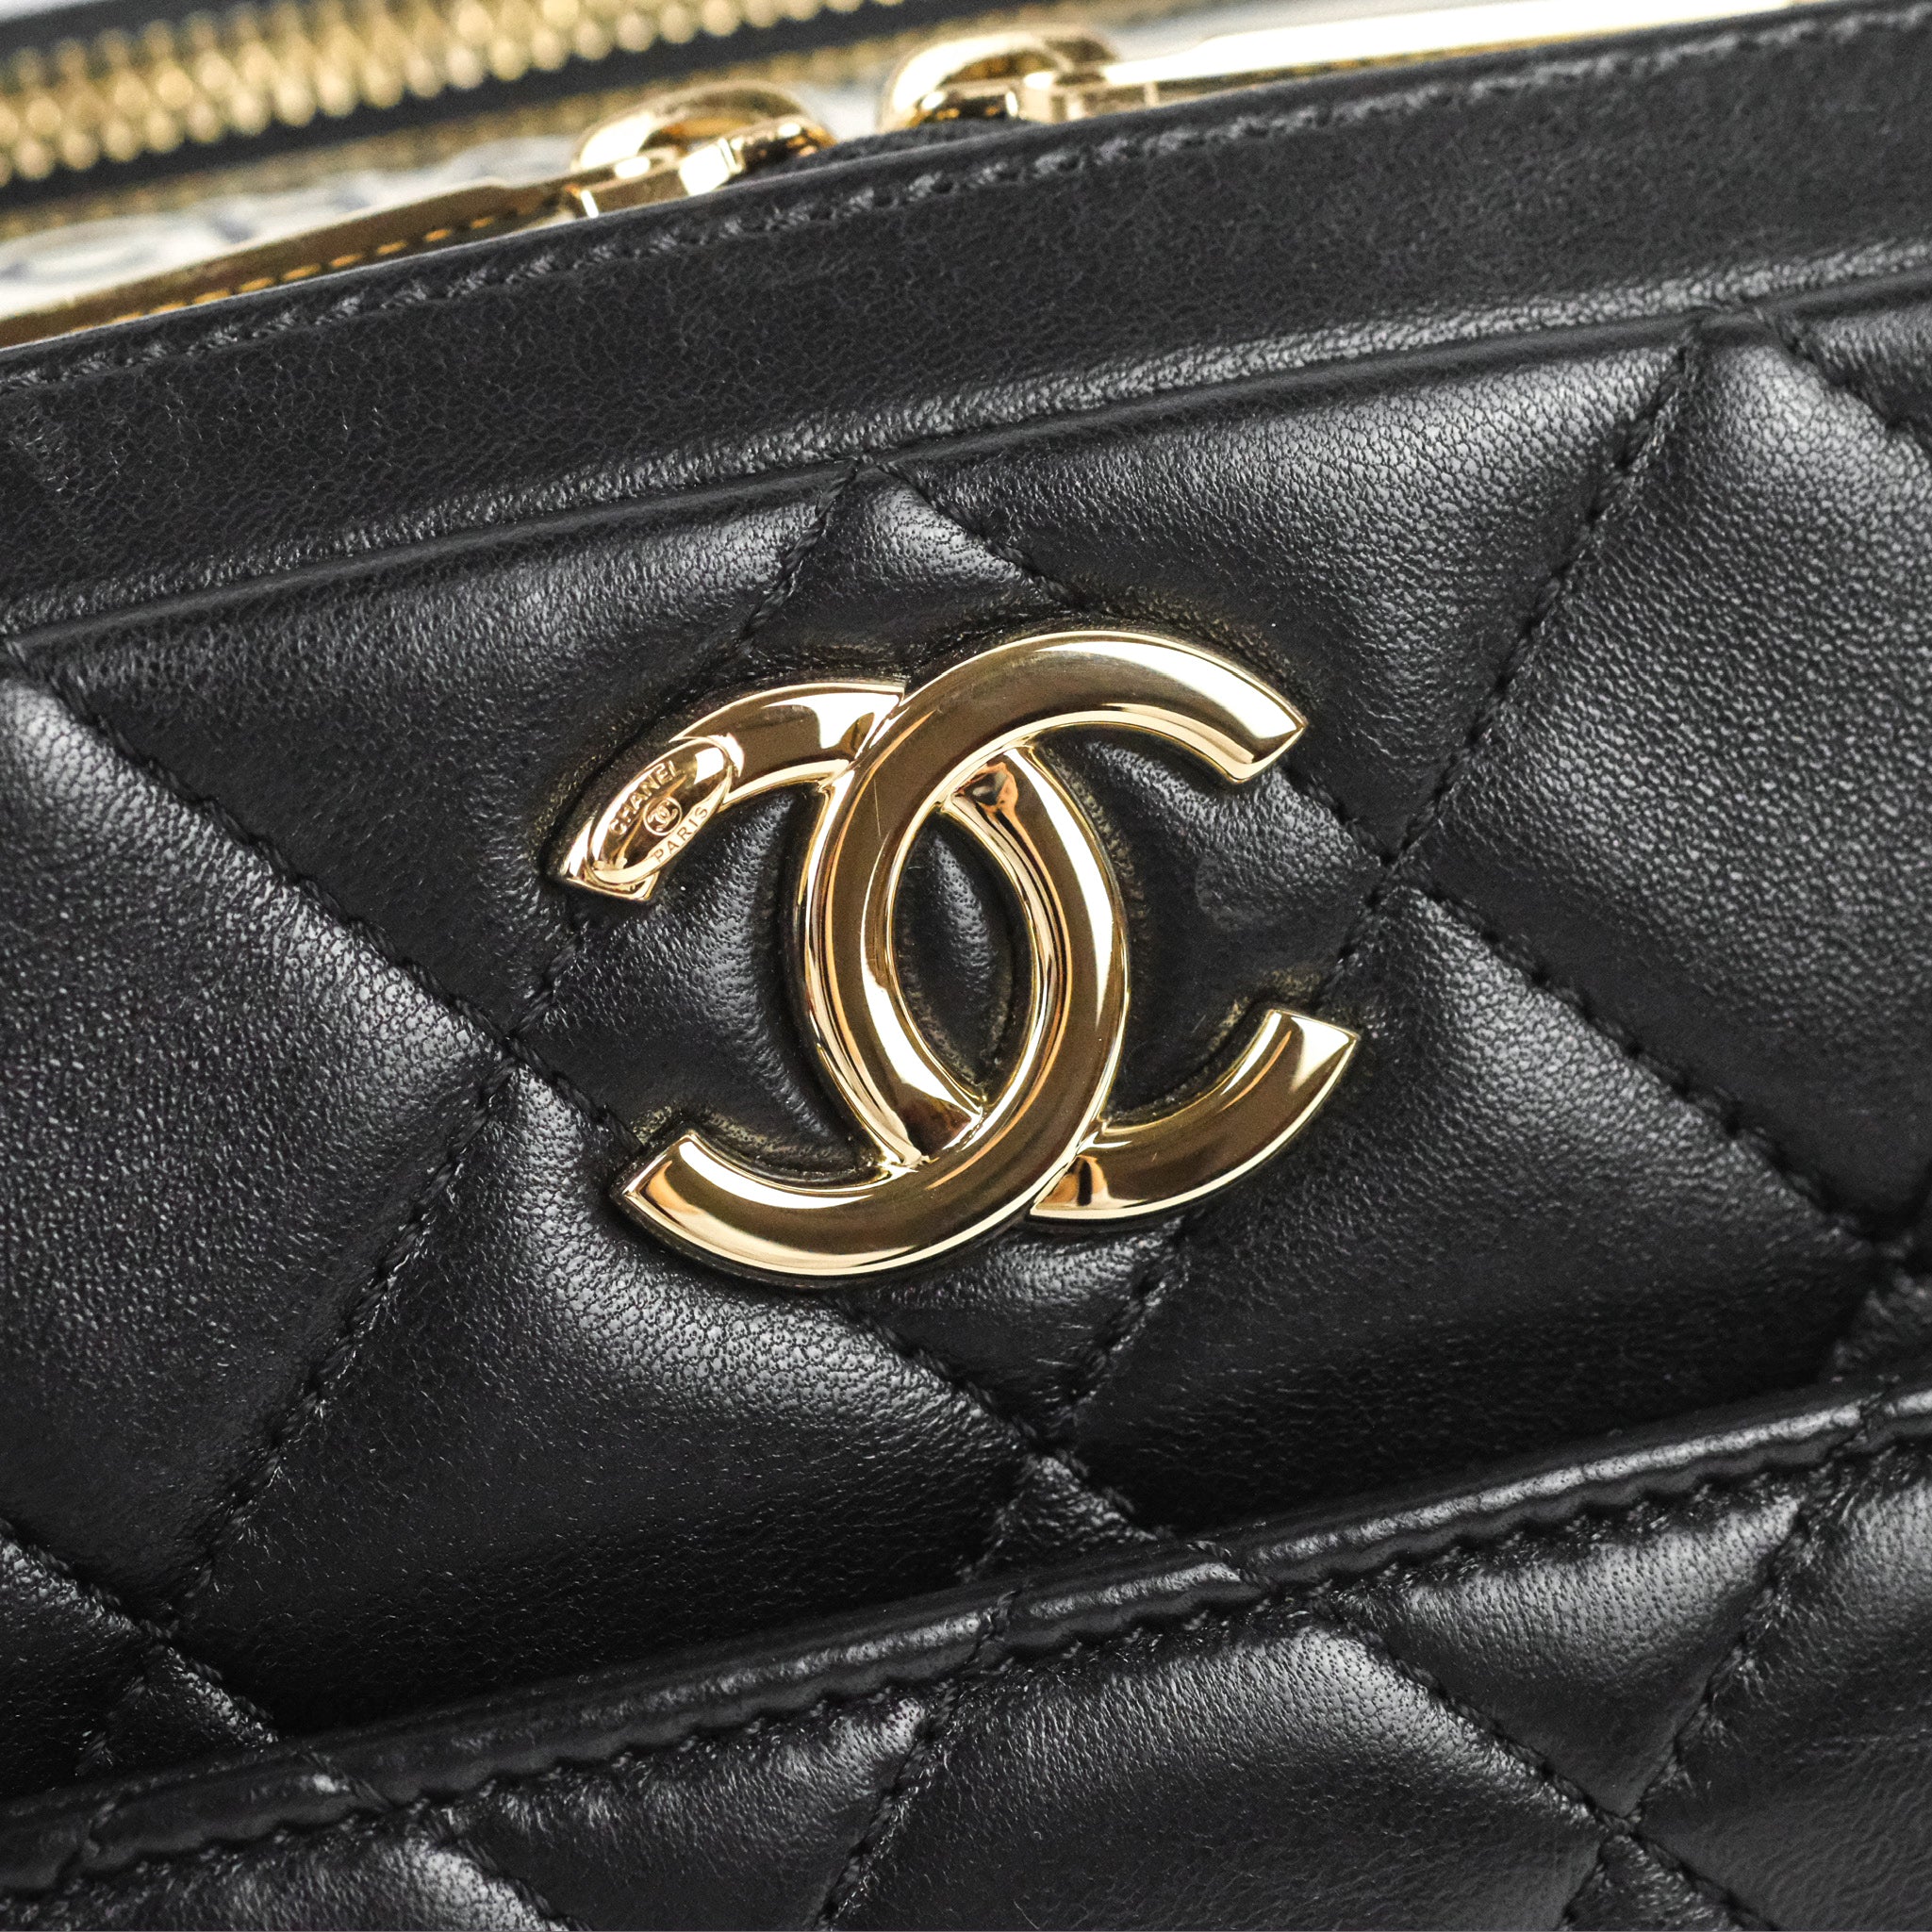 Chanel Quilted Small Trendy CC Bowling Bag Black Lambskin Gold